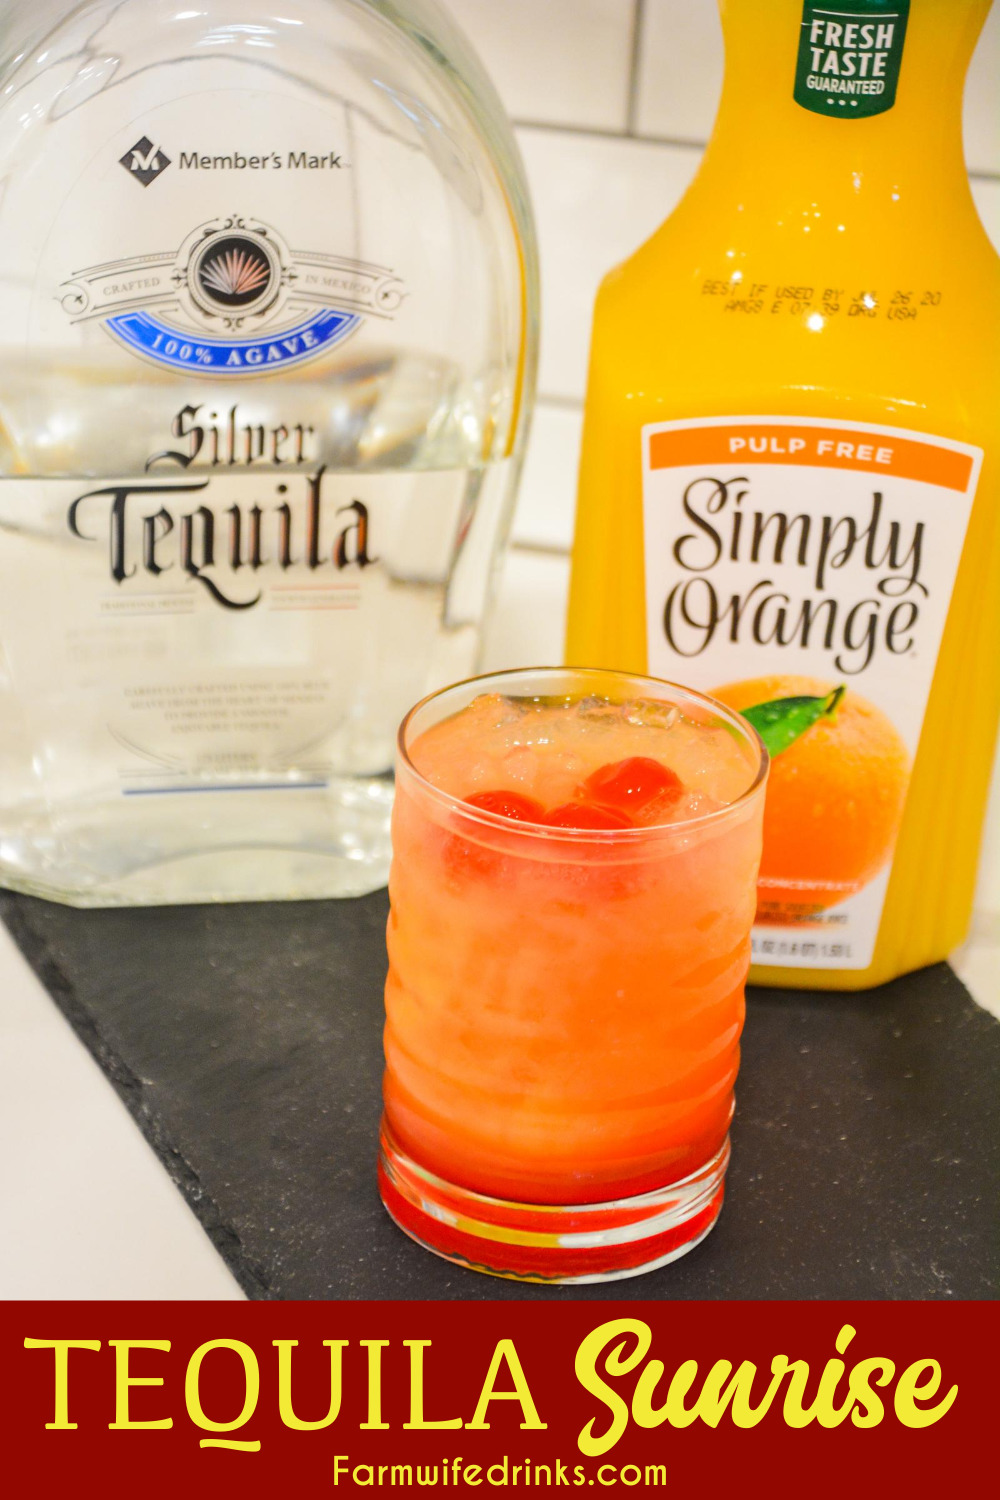 Tequila Sunrise is an orange juice and tequila cocktail made smooth with the addition of cherries and grenadine made famous in the 70s by Mick Jagger.